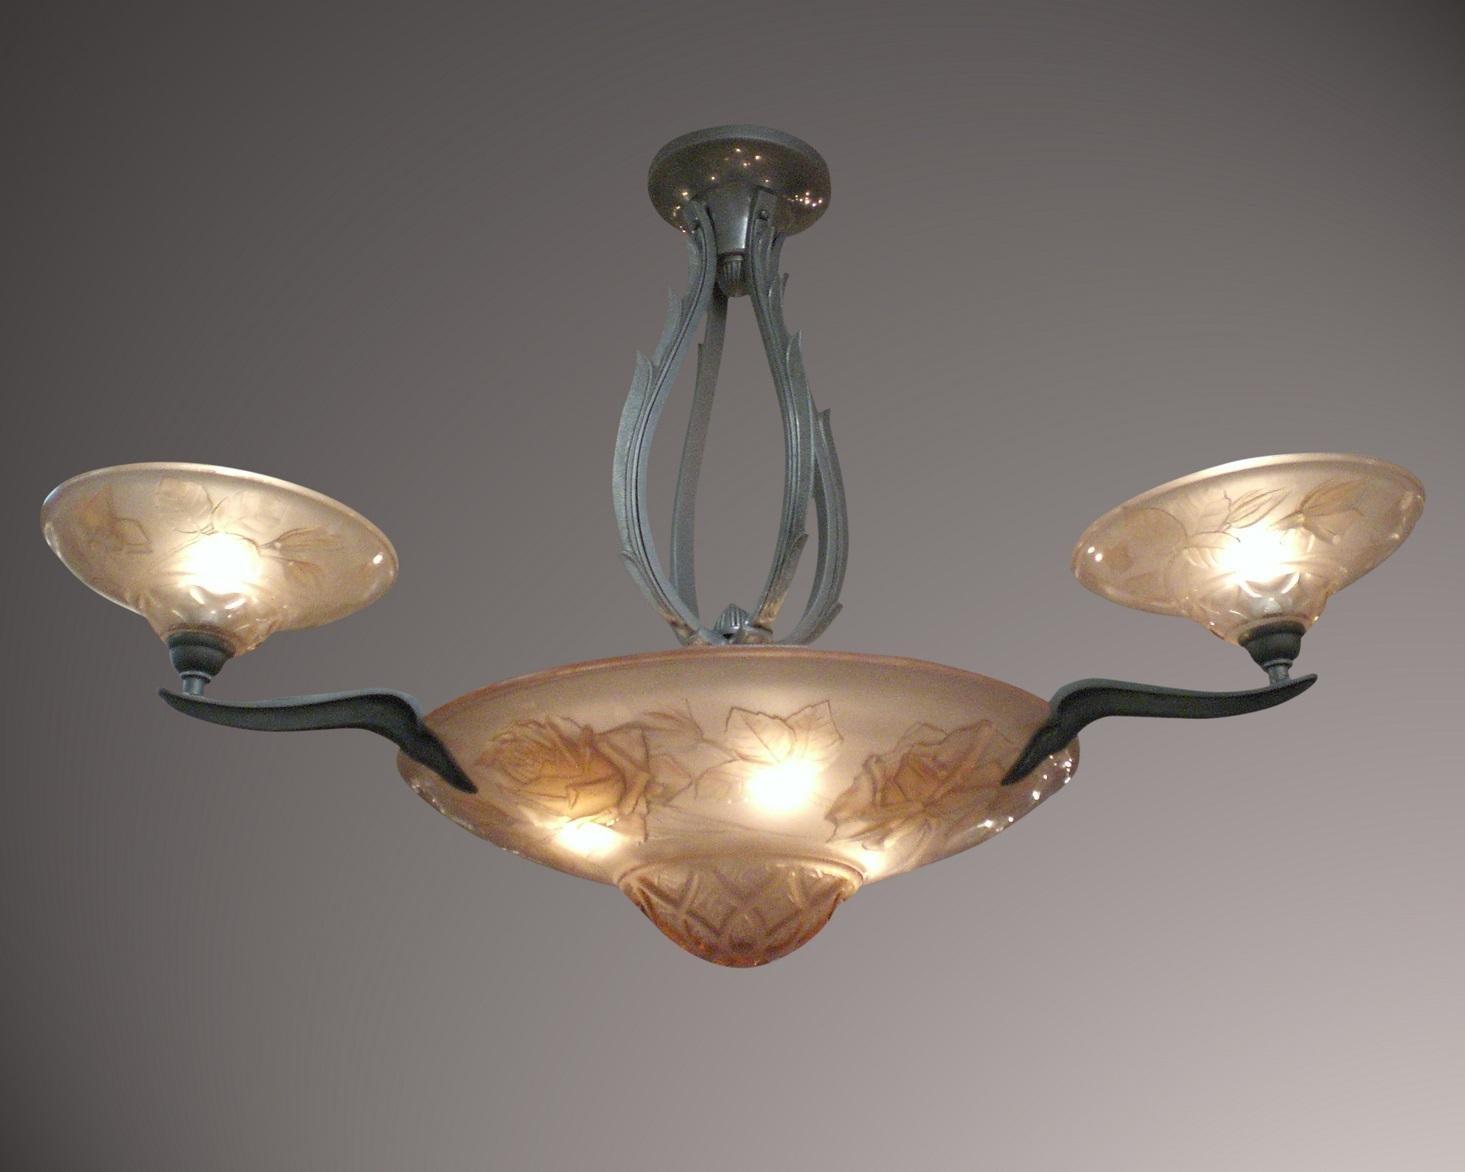 An original colorful French Art Deco living coral tinted, heavily molded art glass chandelier depicting realistic rose and leaf pattern
Signed : Verdun
 Three satellite dishes surround a central coupe while suspended by a flame-like or vine-like